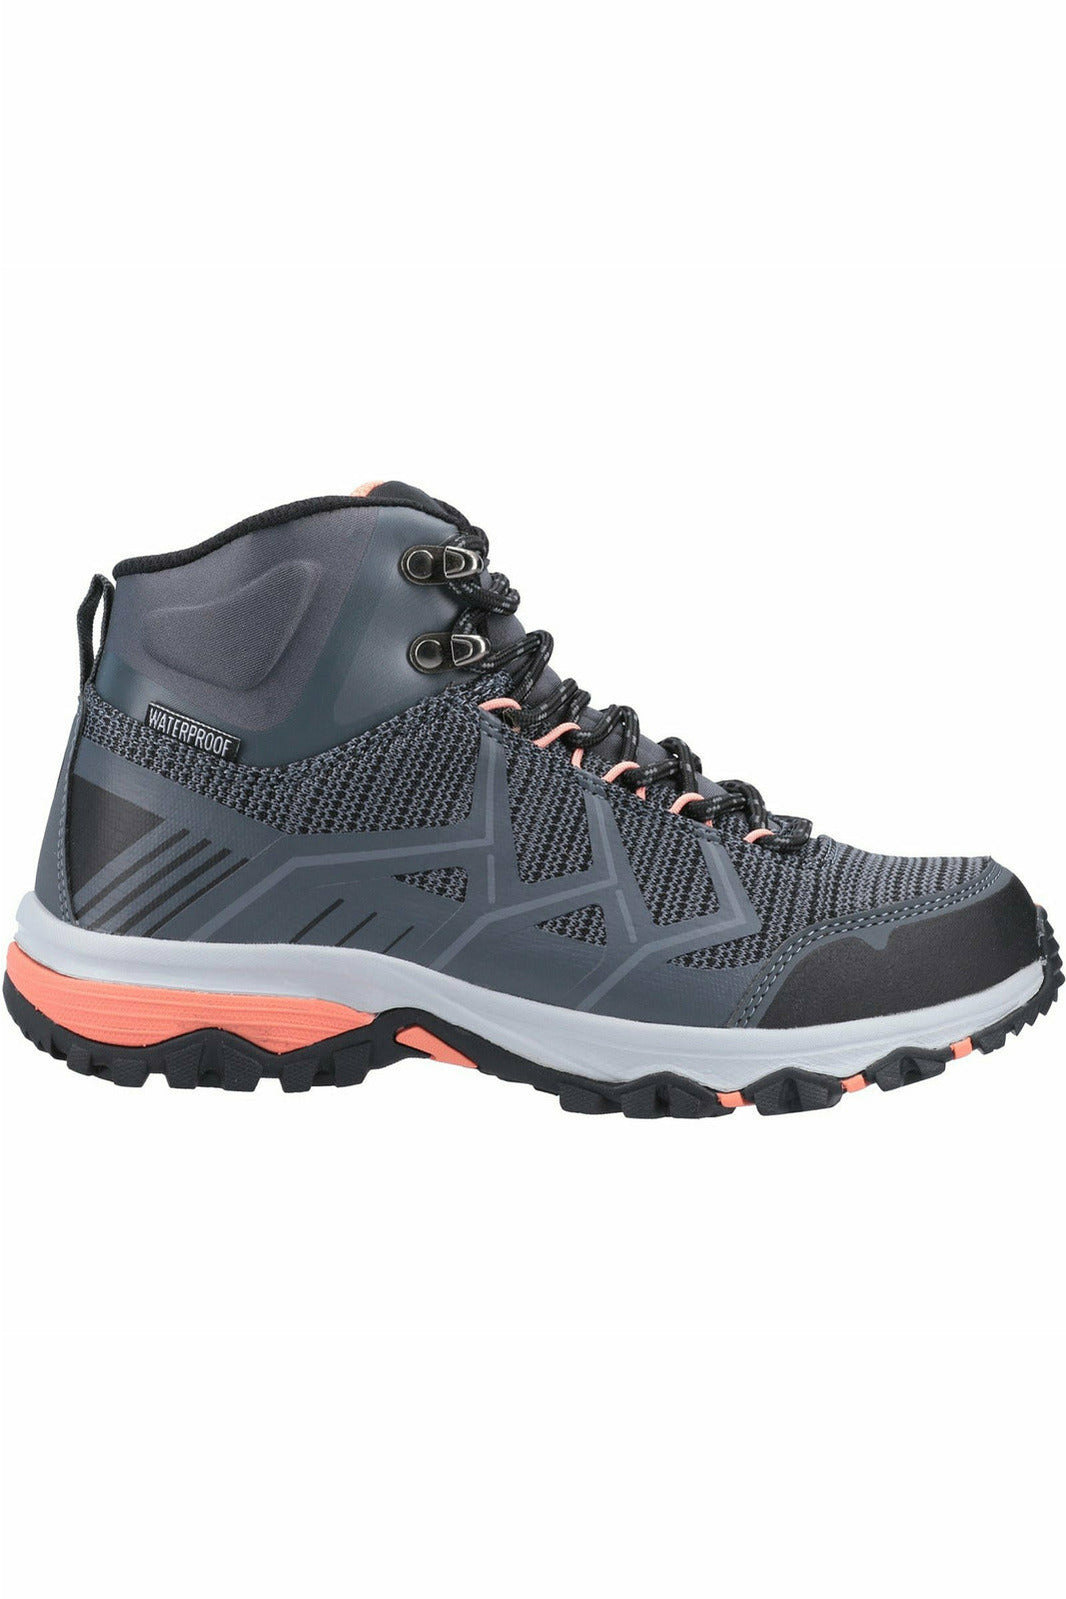 Cotswold - Wychwood Mid Ladies Hiking Boots